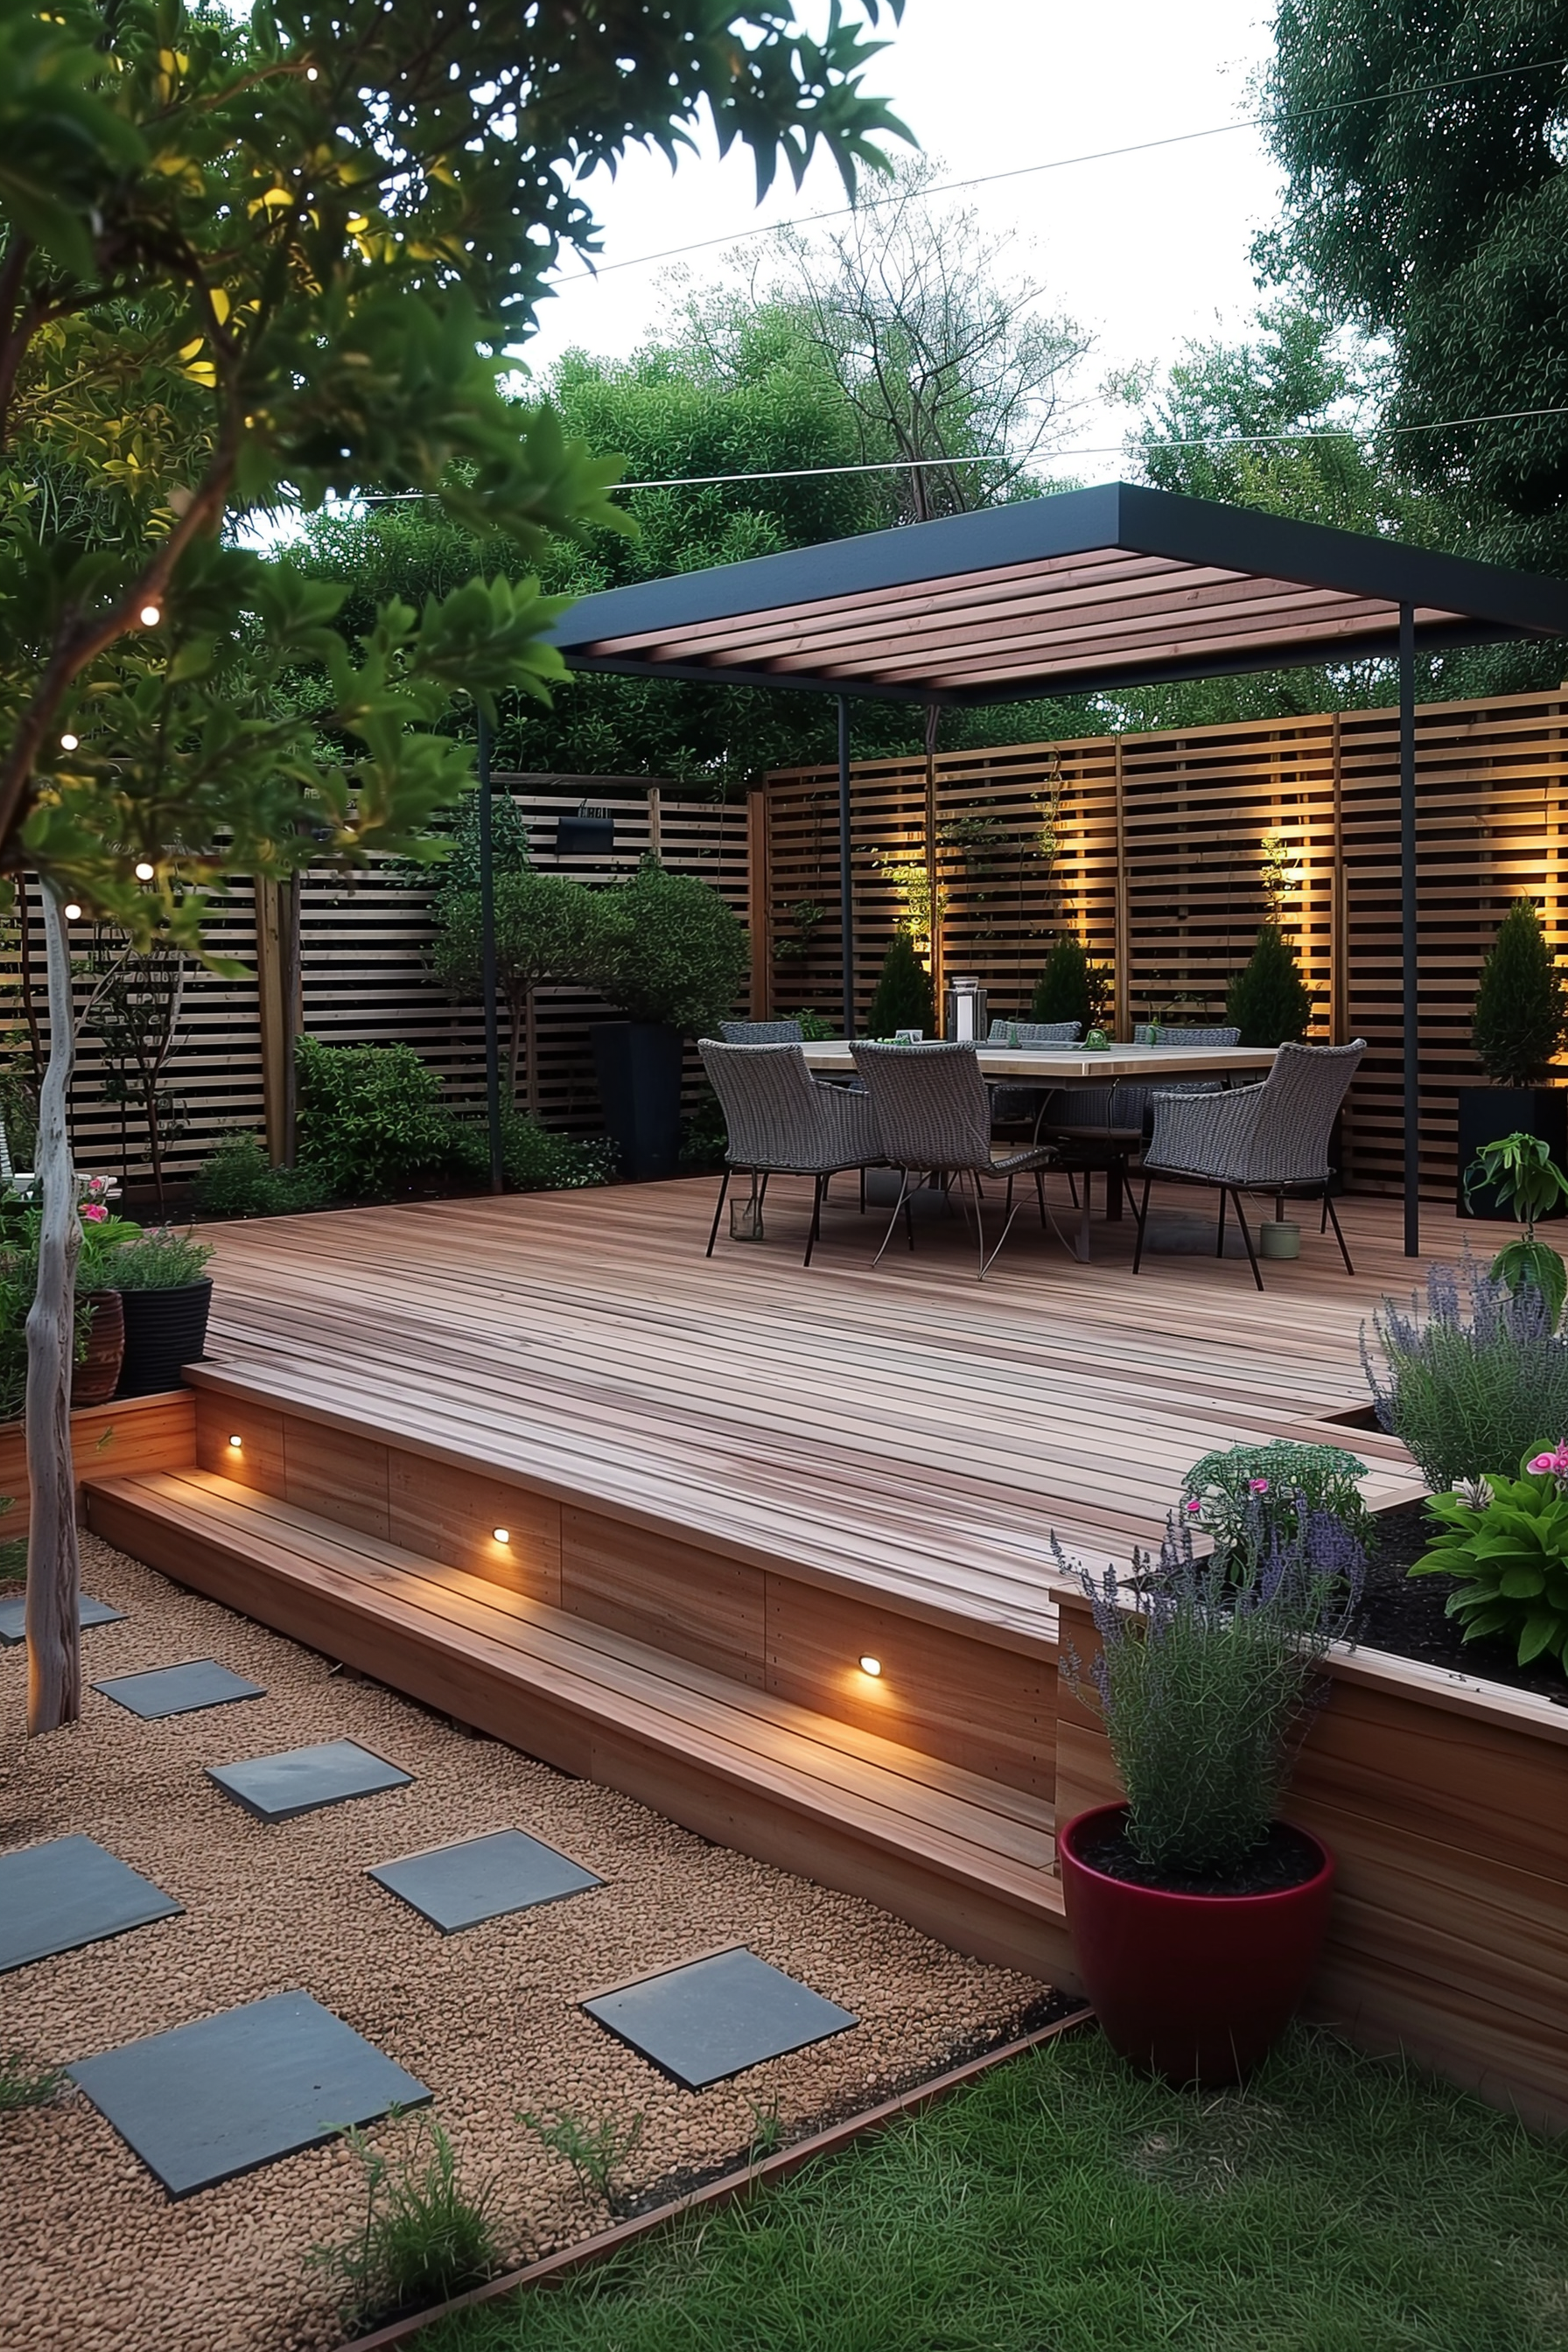 Transform Your Outdoor Oasis with Stunning Backyard Landscaping Ideas